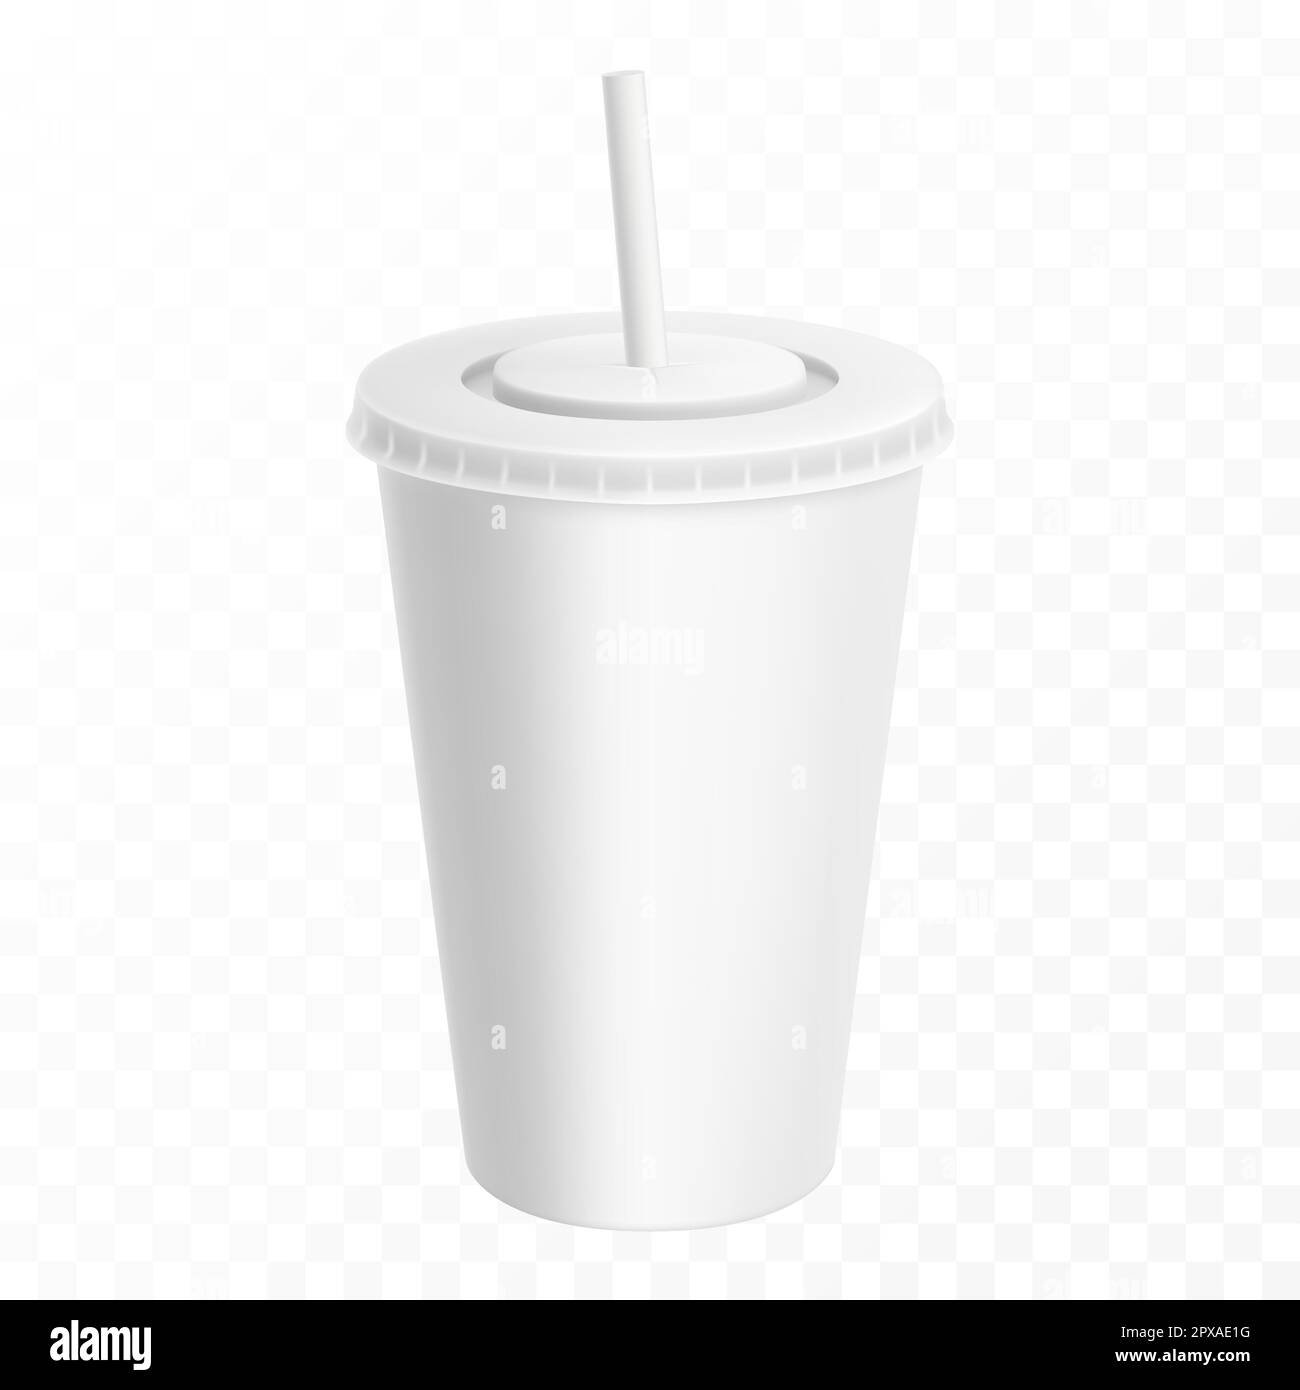 Styrofoam Cup with Plastic Lid and Straw | 3D model